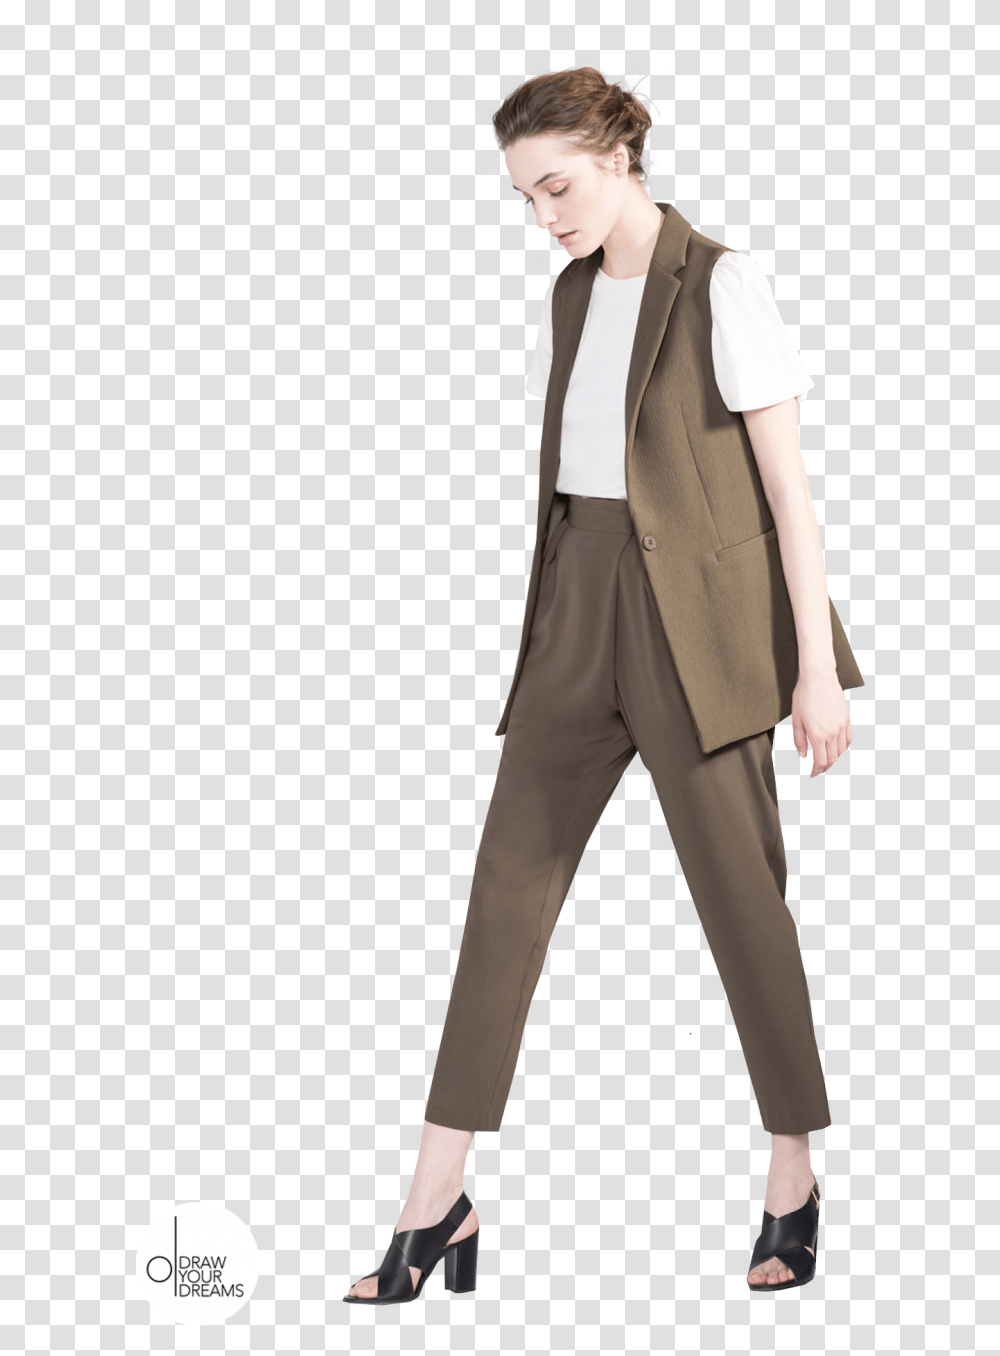 Drawyourdreams People Cutout Cut Out People People, Suit, Overcoat, Blazer Transparent Png